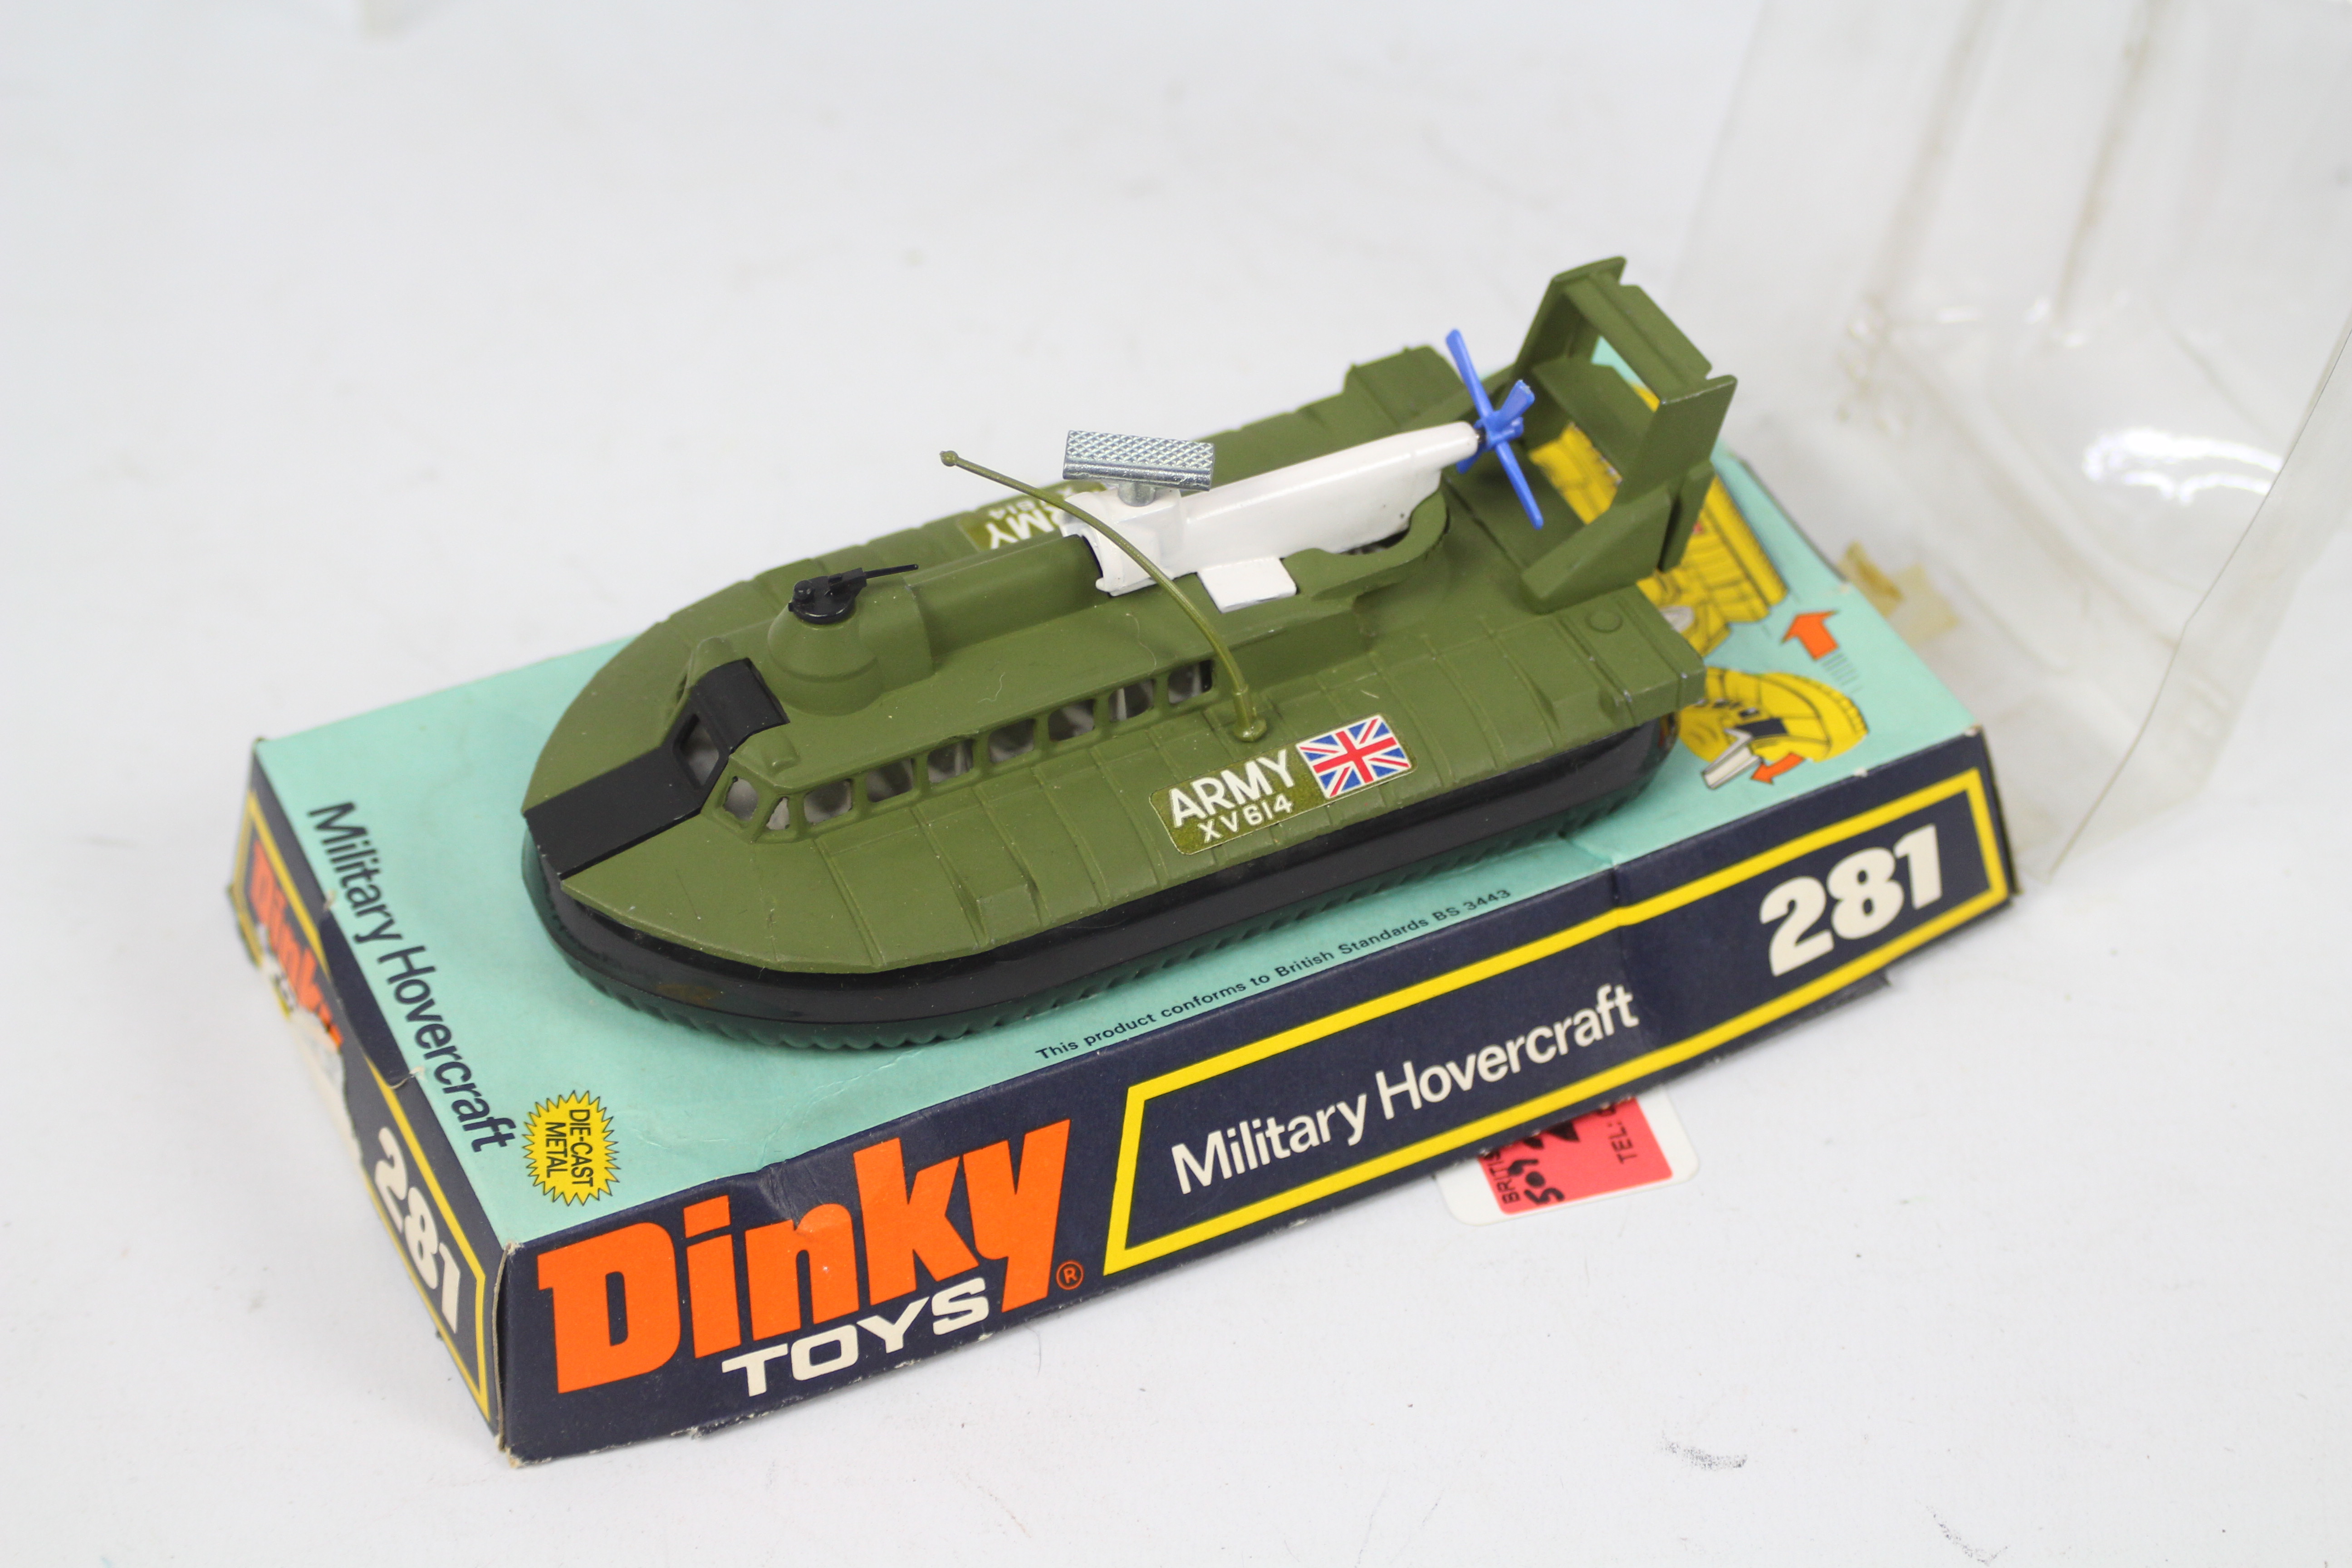 Dinky Toys - A Boxed Military Hovercraft #281appearing in Mint condition. - Image 3 of 5